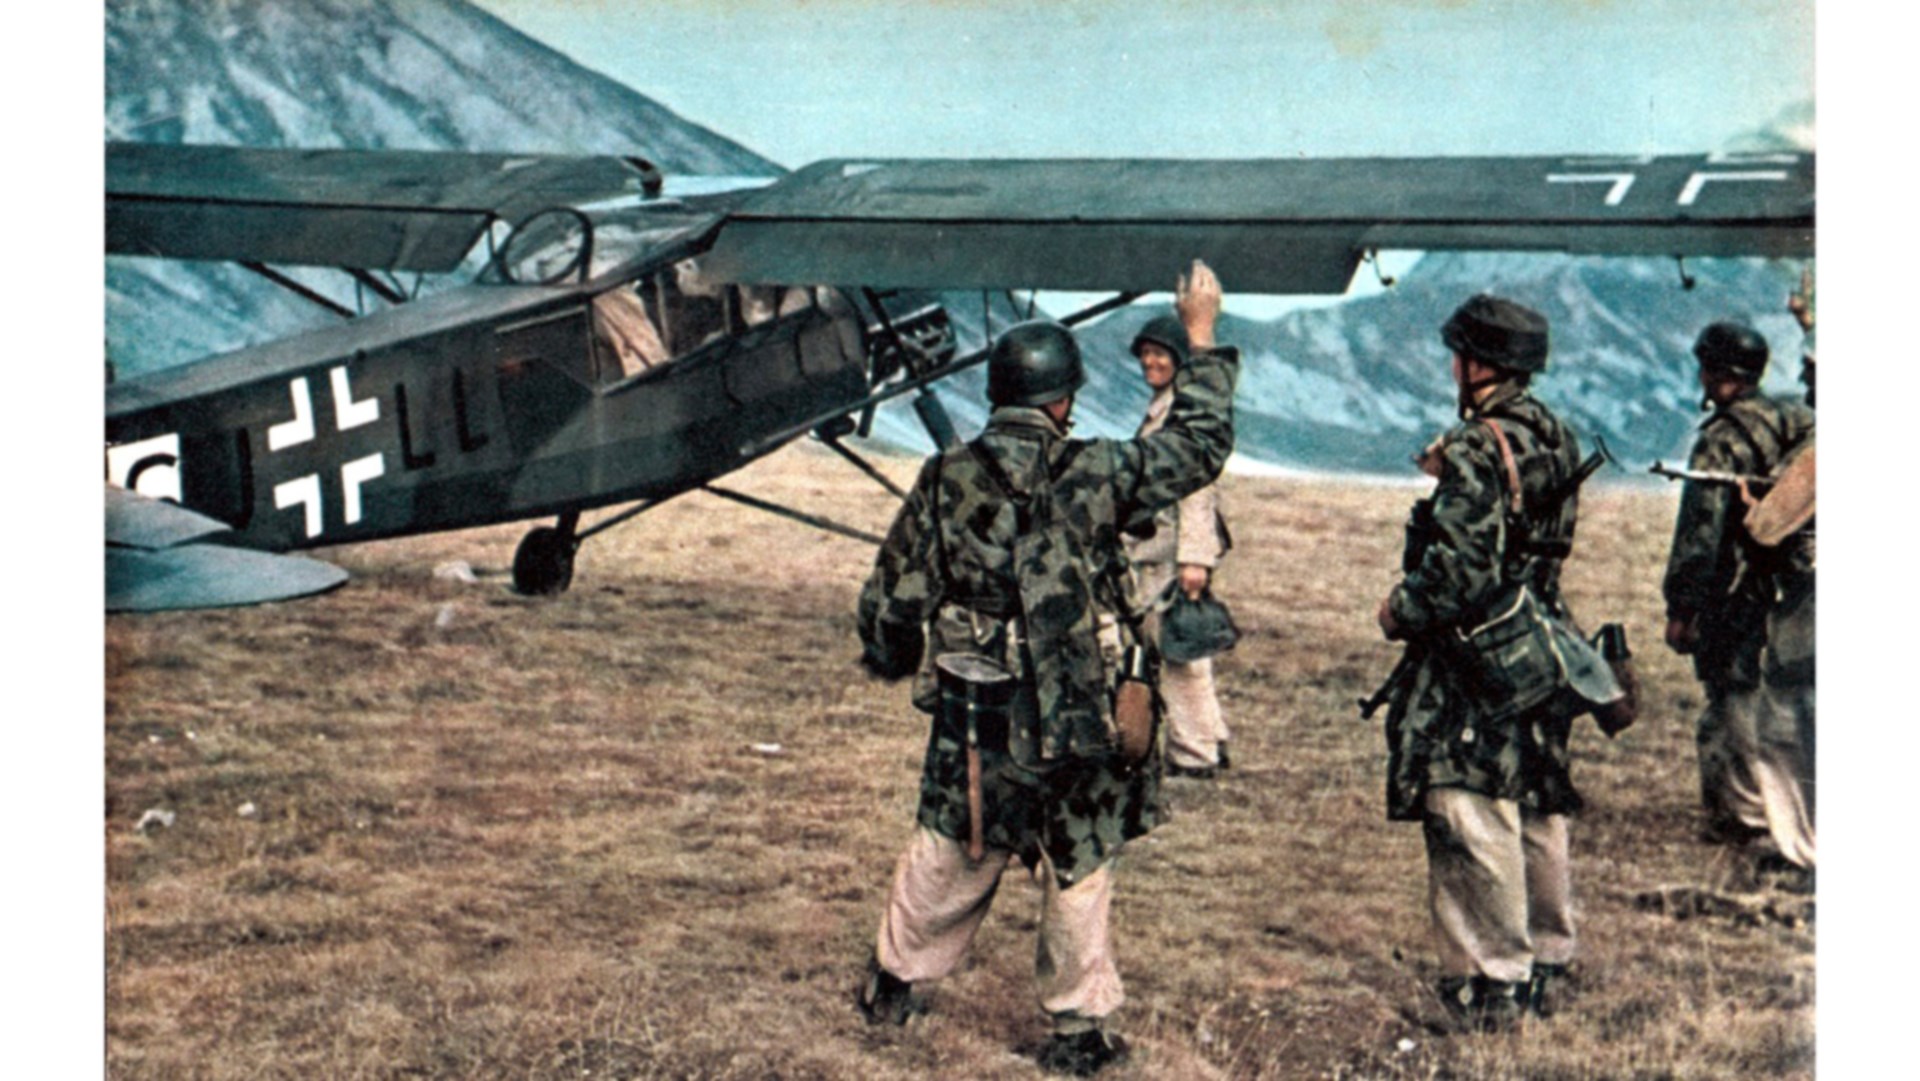 With Mussolini and Otto Skorzeny stuffed into the small Fieseler Fi 156 “Storch”—the pilot taking off the overloaded aircraft in just 250 feet. Author’s collection